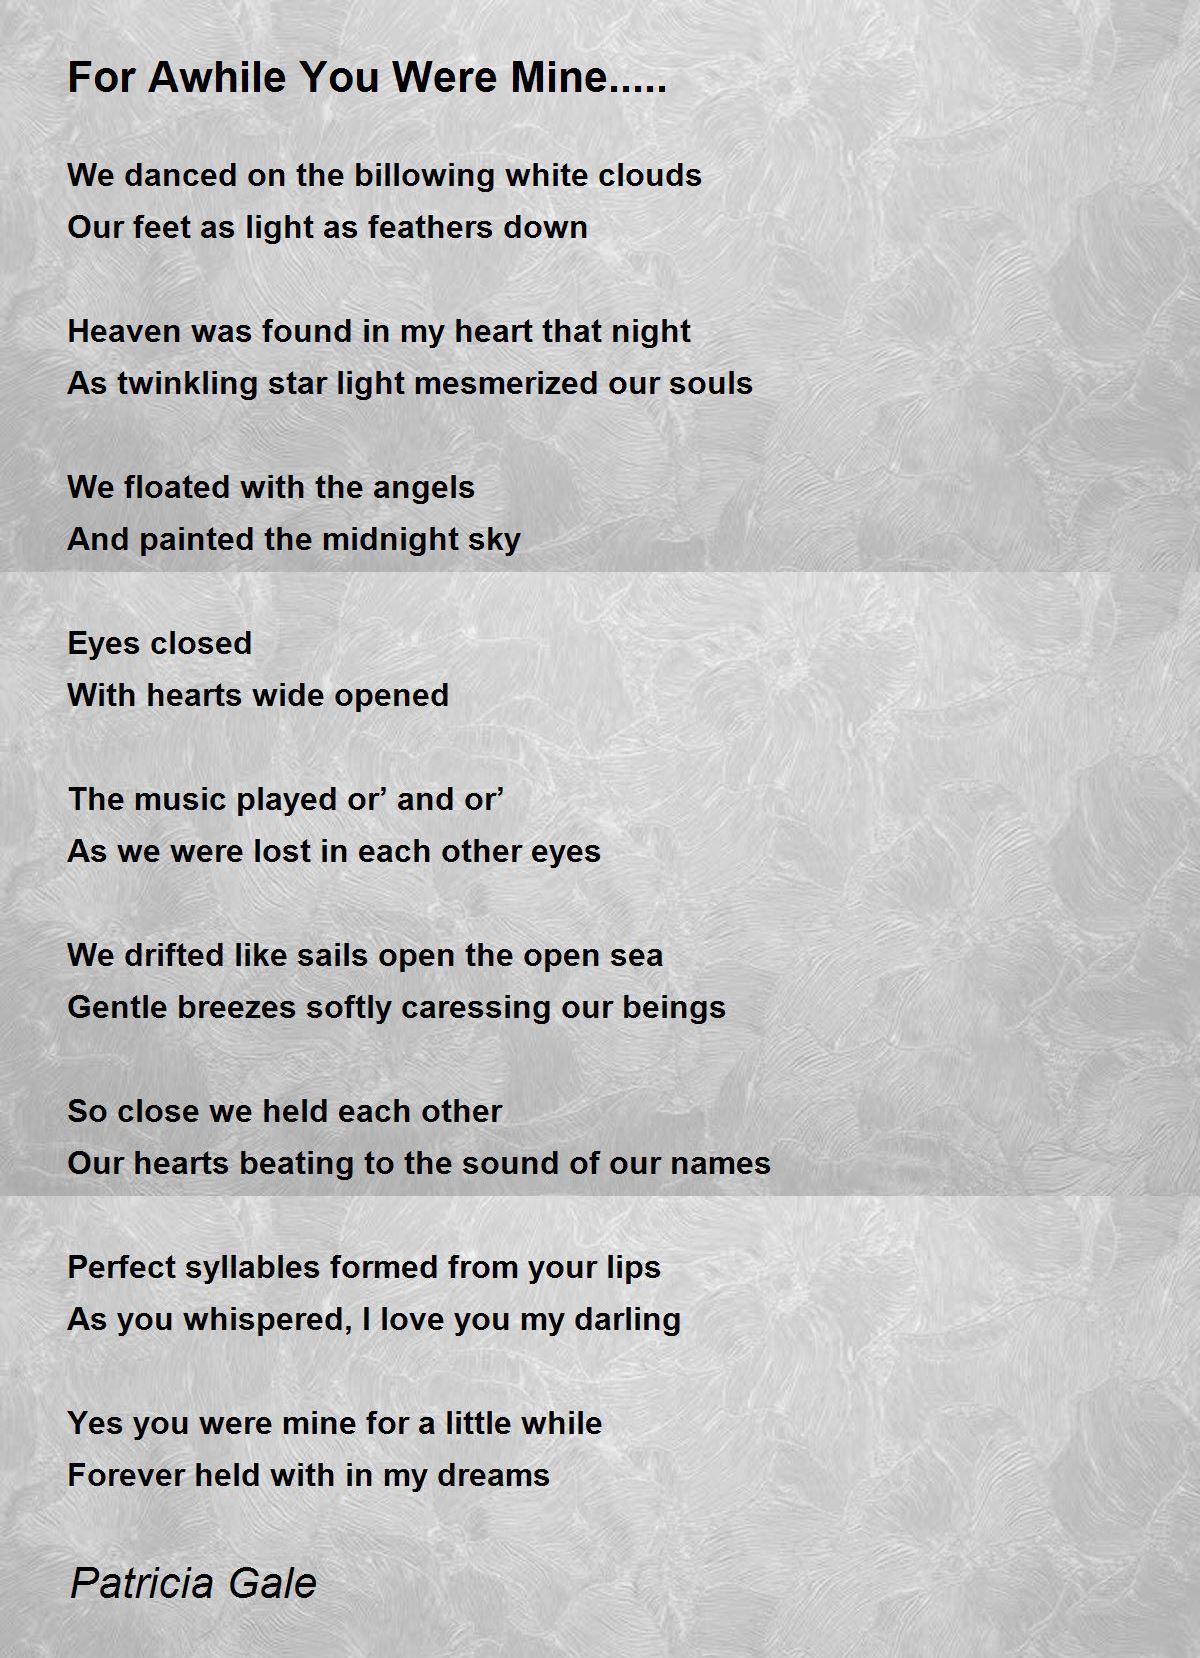 For Awhile You Were Mine..... Poem by Patricia Gale